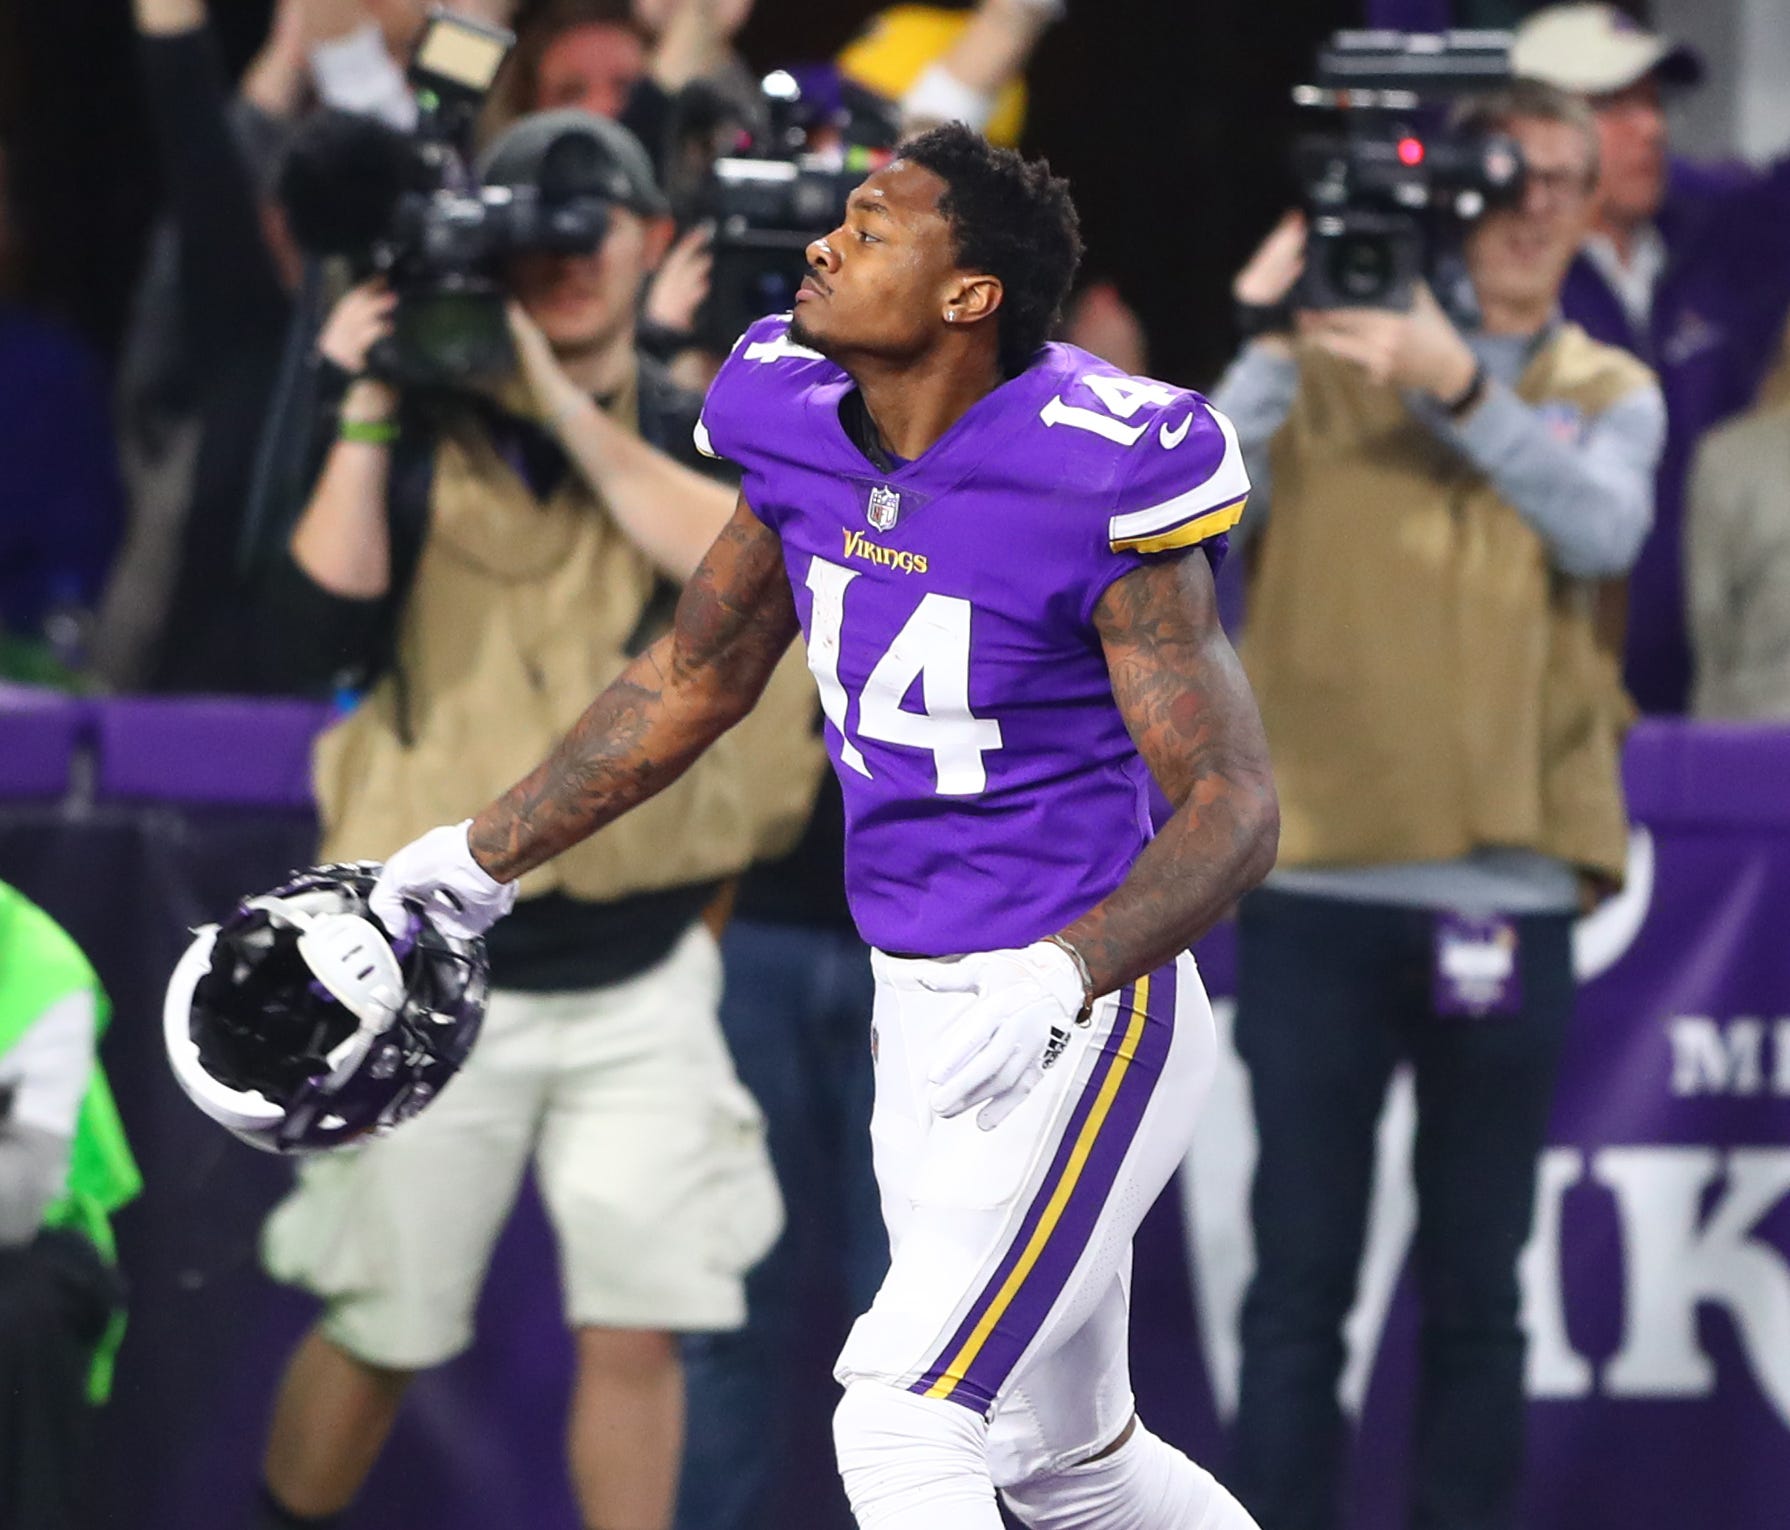 Minnesota Vikings wide receiver Stefon Diggs celebrates after catching the game winning catch against the New Orleans Saints at U.S. Bank Stadium.